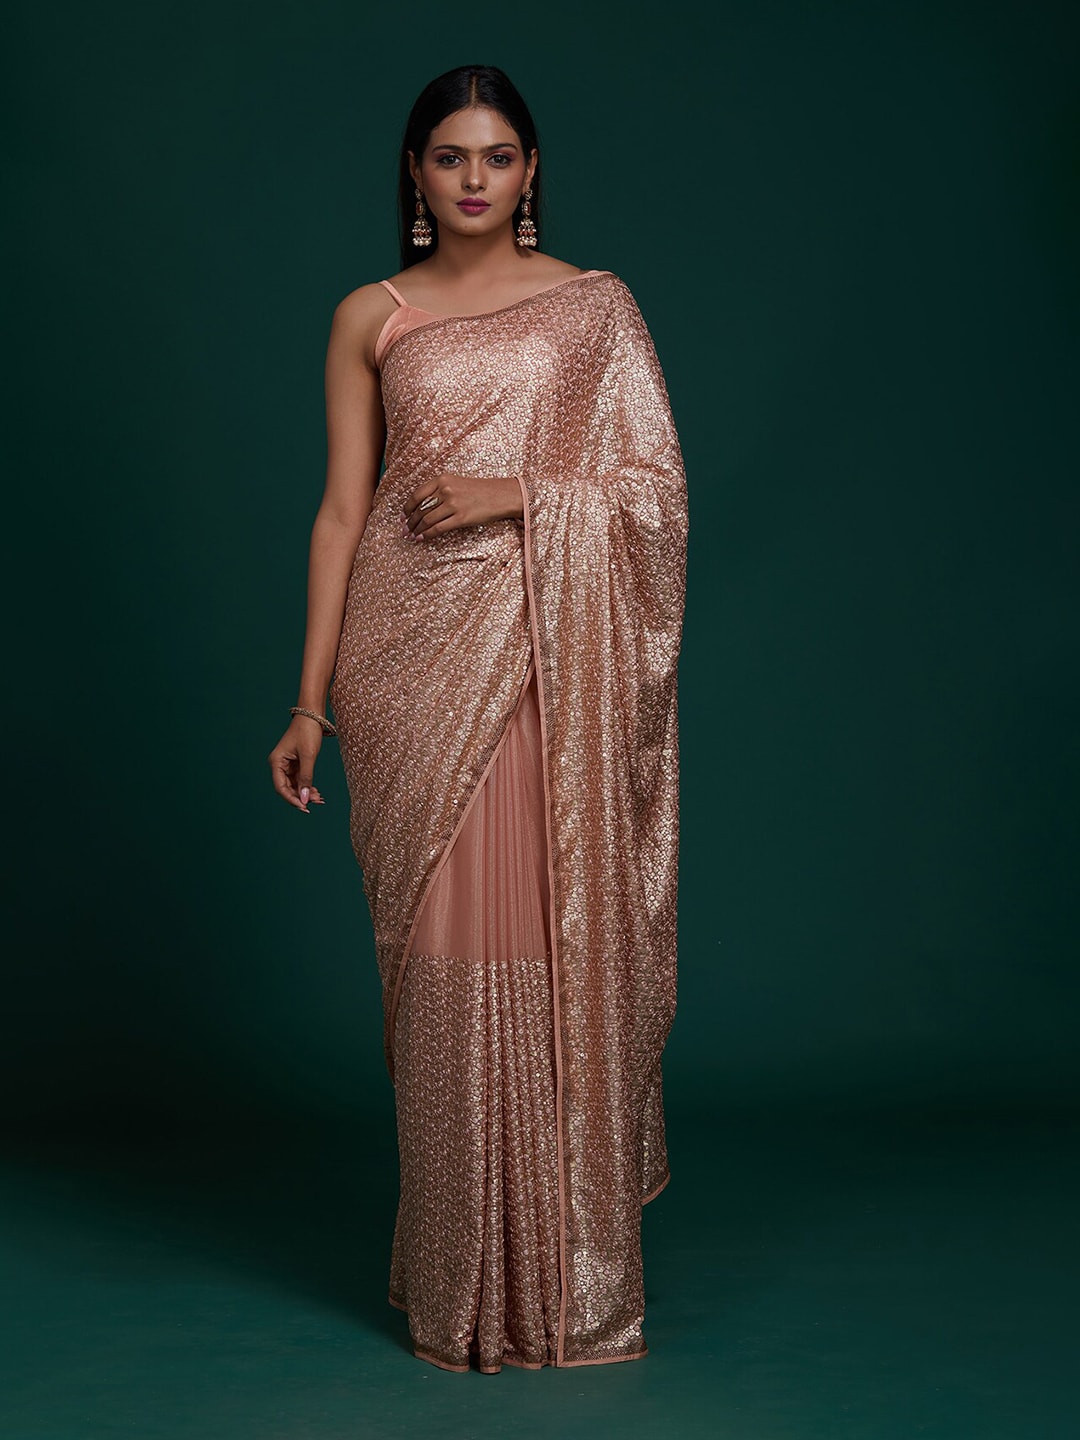 Koskii Peach-Coloured & Gold-Toned Embellished Sequinned Supernet Saree Price in India